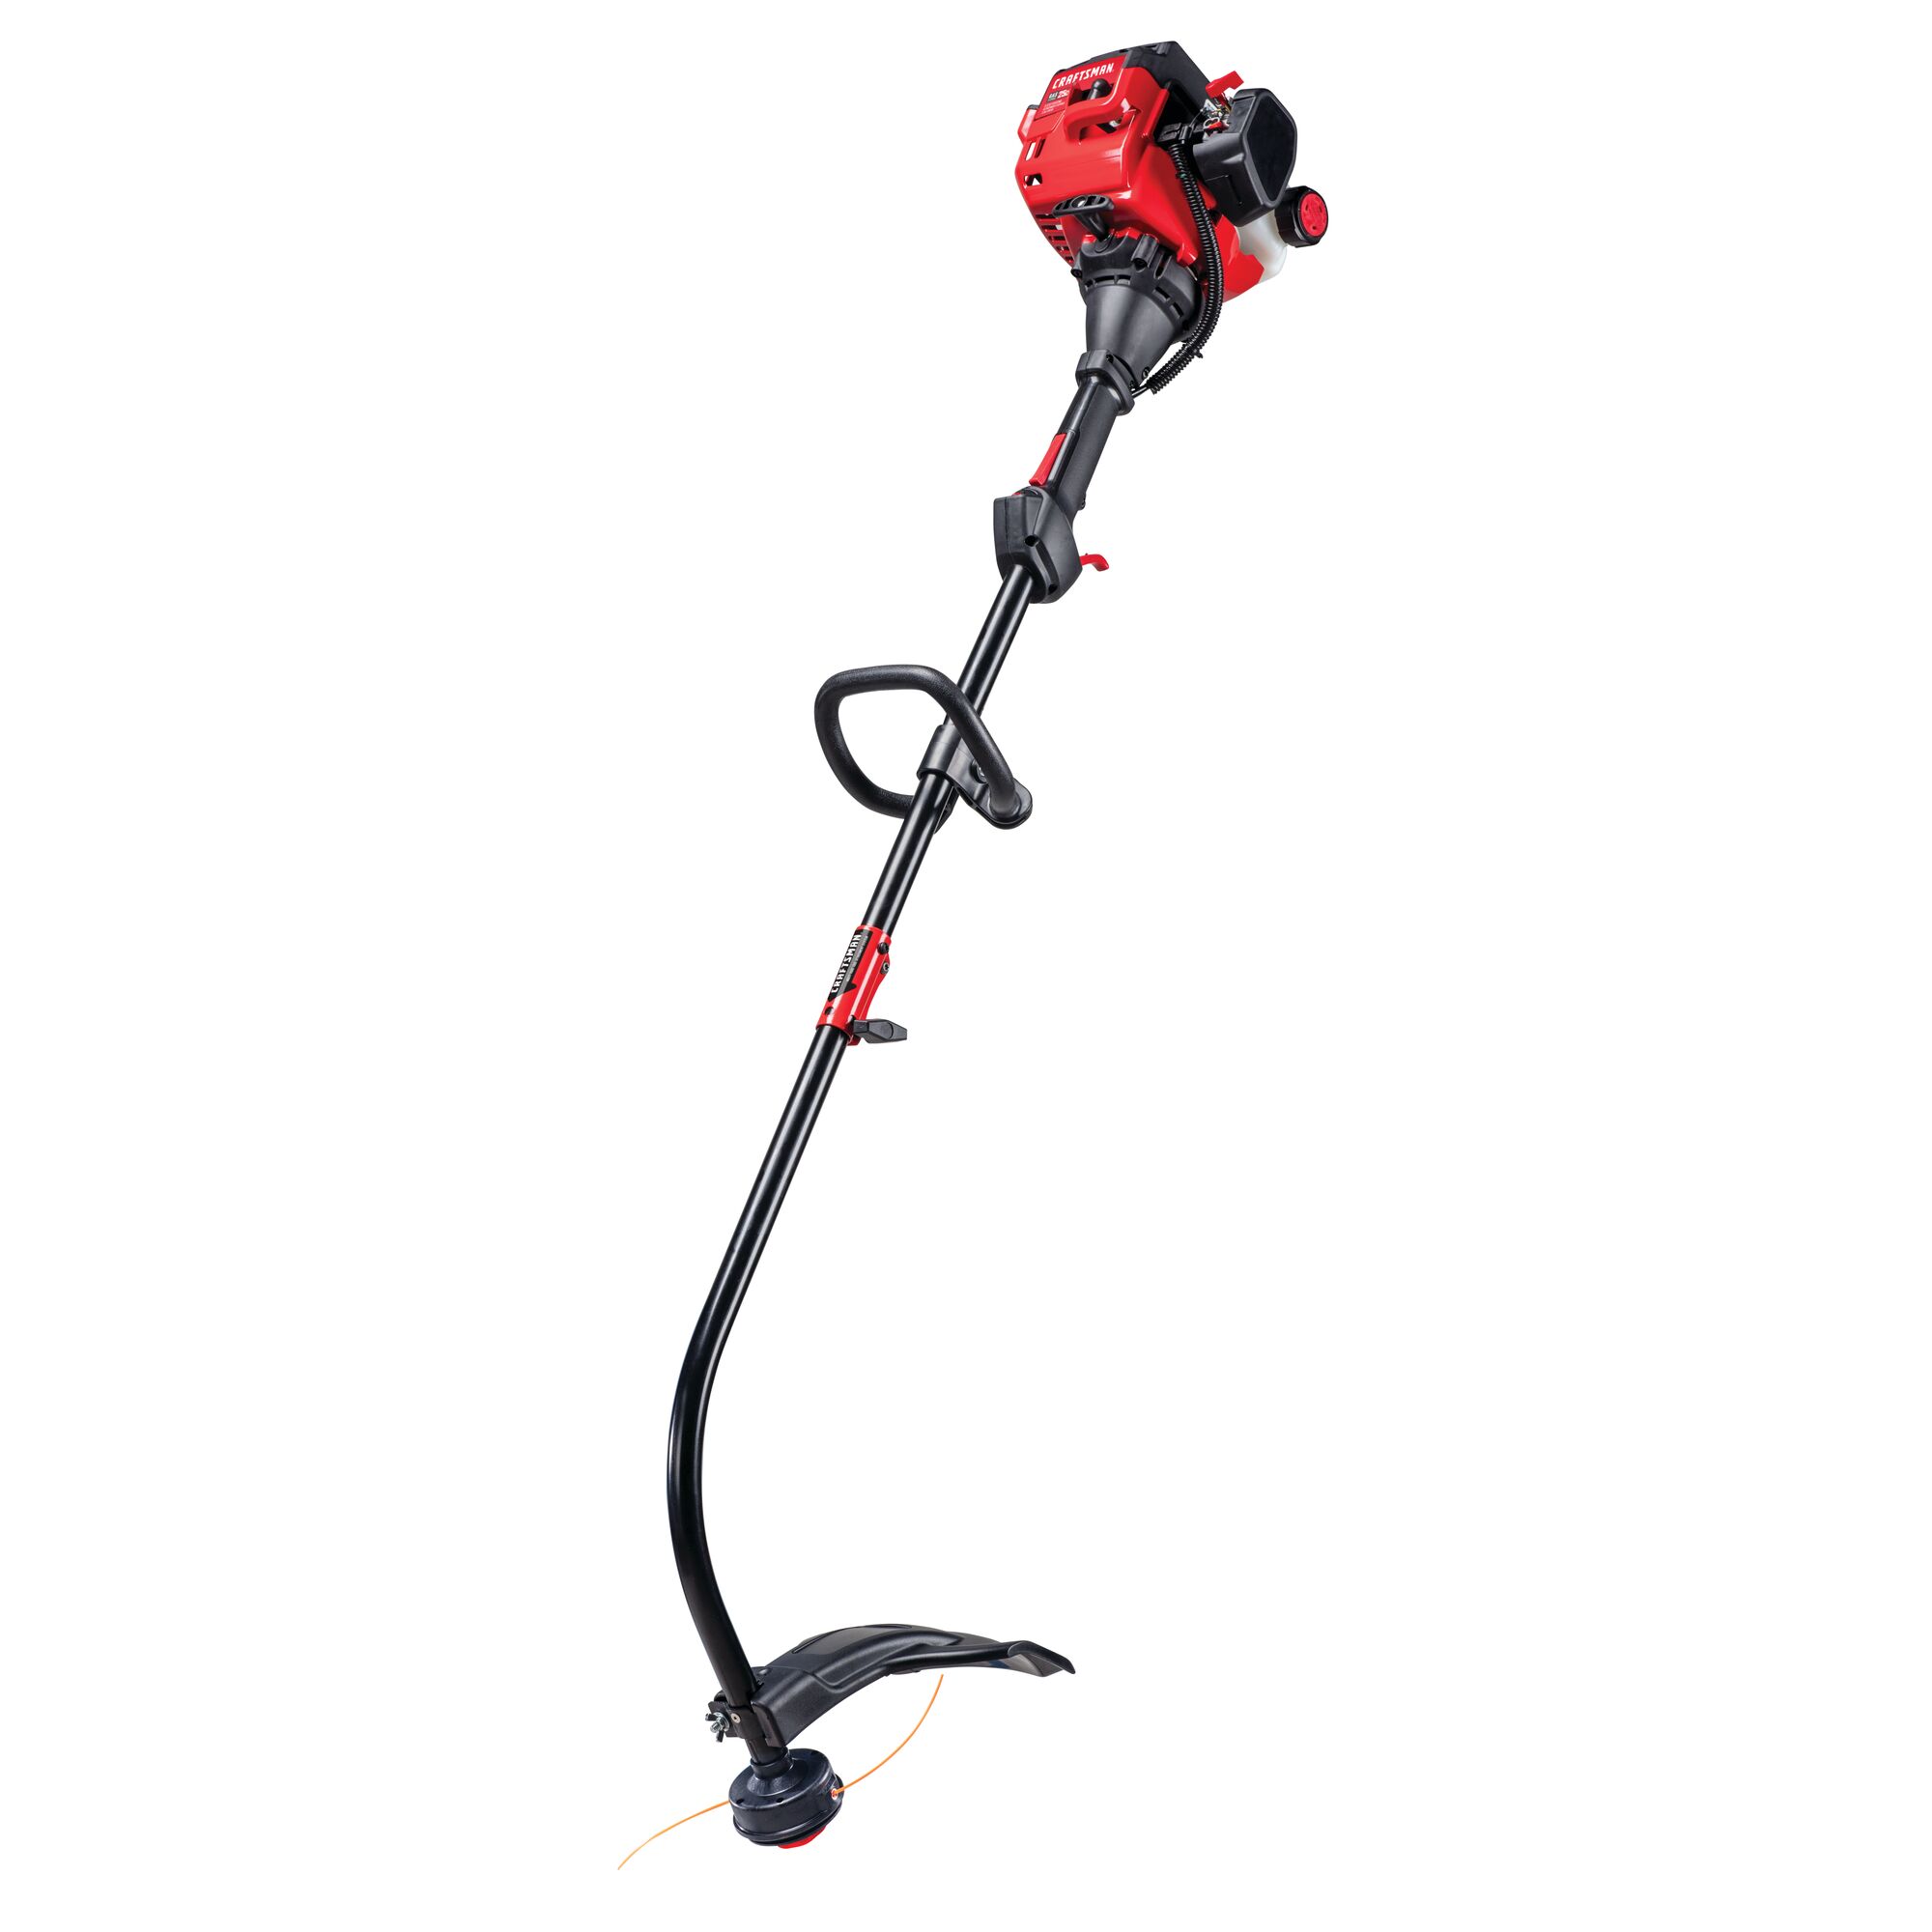 Right profile of 2 Cycle 17 inch attachment capable curved shaft gas weedwacker trimmer.